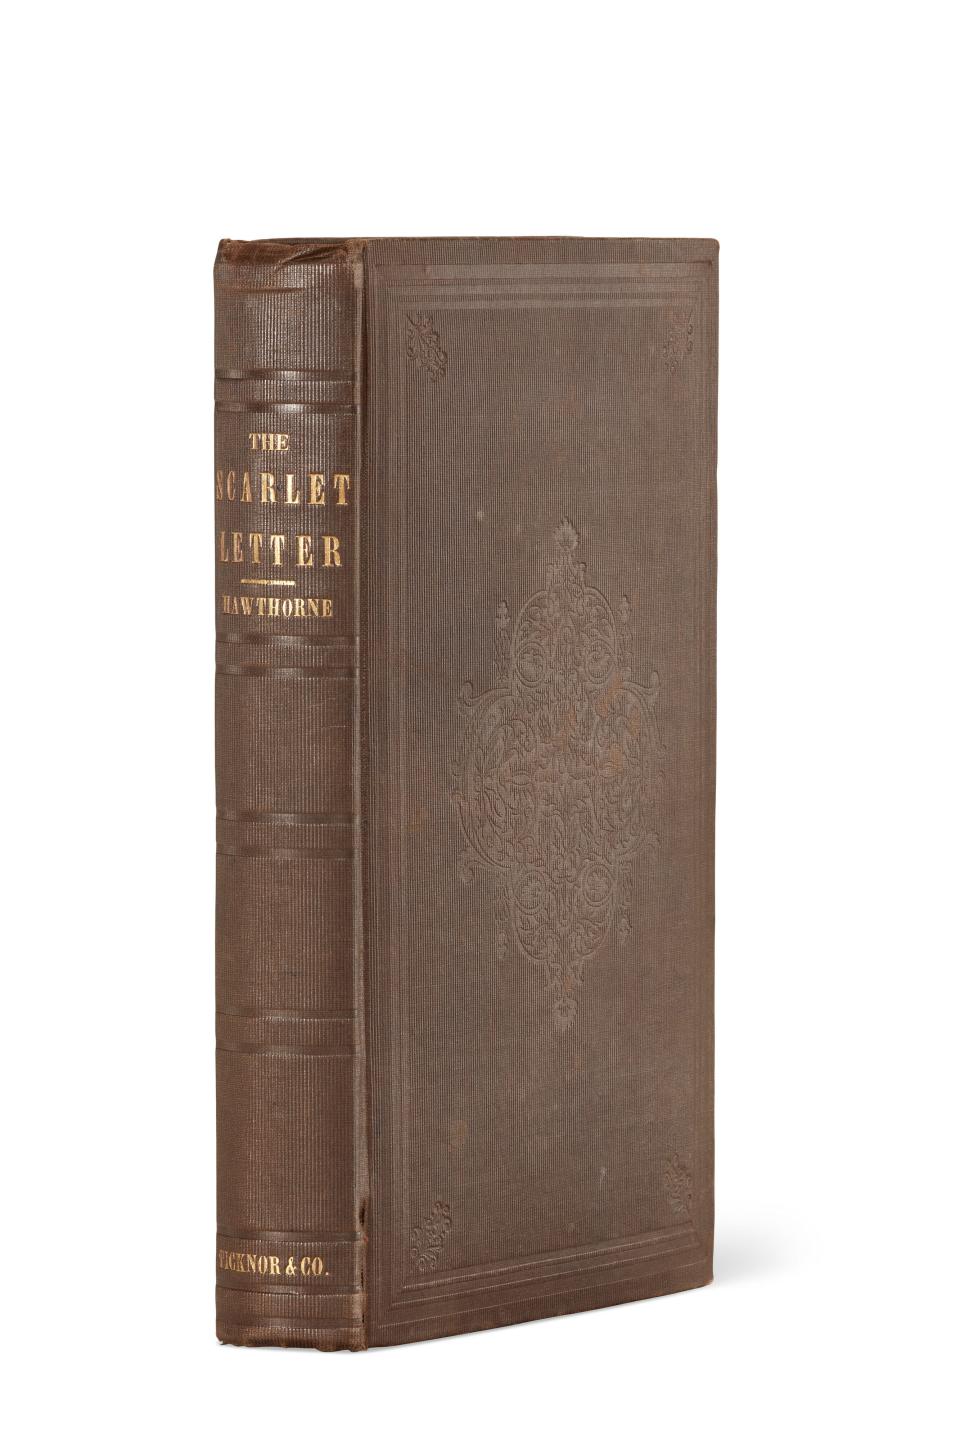 The annotated proof of Nathaniel Hawthorne's "The Scarlet Letter" is the centerpiece of The Bruce M. Lisman Collection of Important American Literature, which is being auctioned by Christie's in New York.